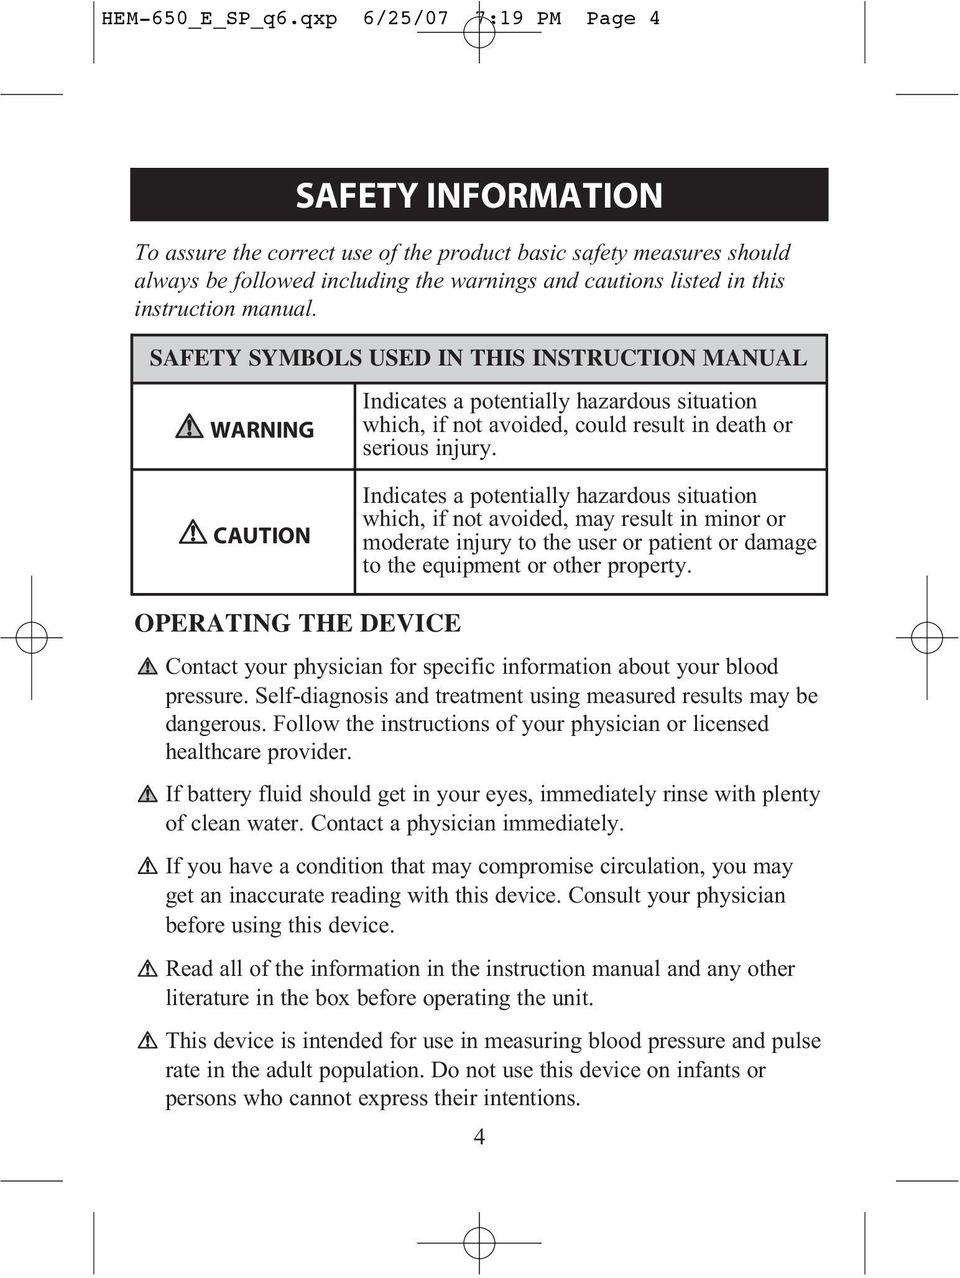 manual. SAFETY SYMBOLS USED IN THIS INSTRUCTION MANUAL WARNING Indicates a potentially hazardous situation which, if not avoided, could result in death or serious injury.